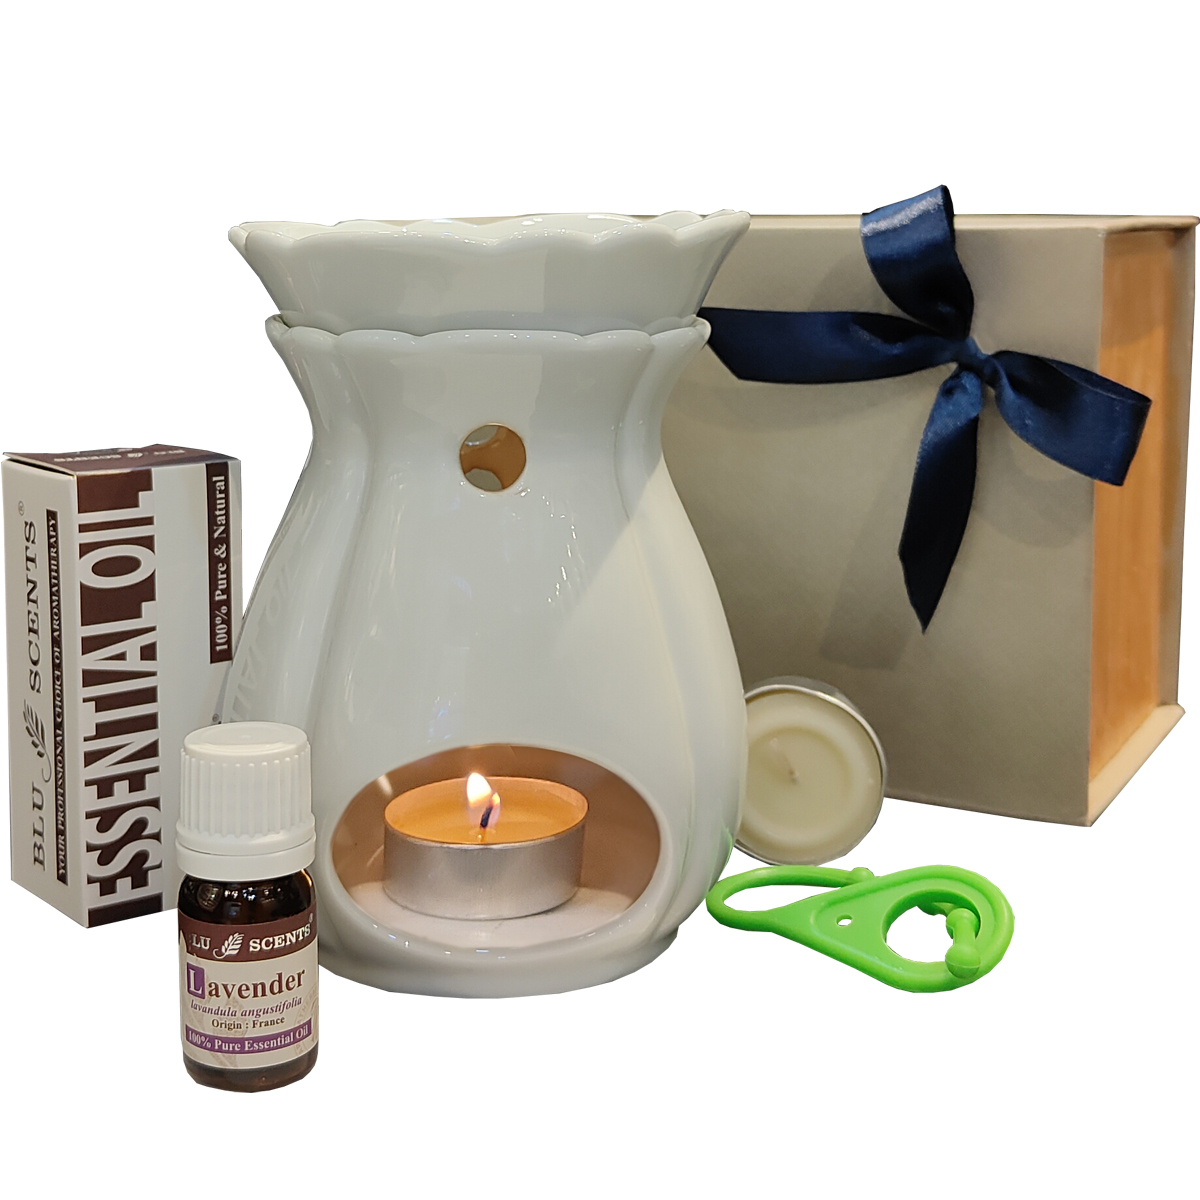 Relax Lavender with Tulip Burner Gift